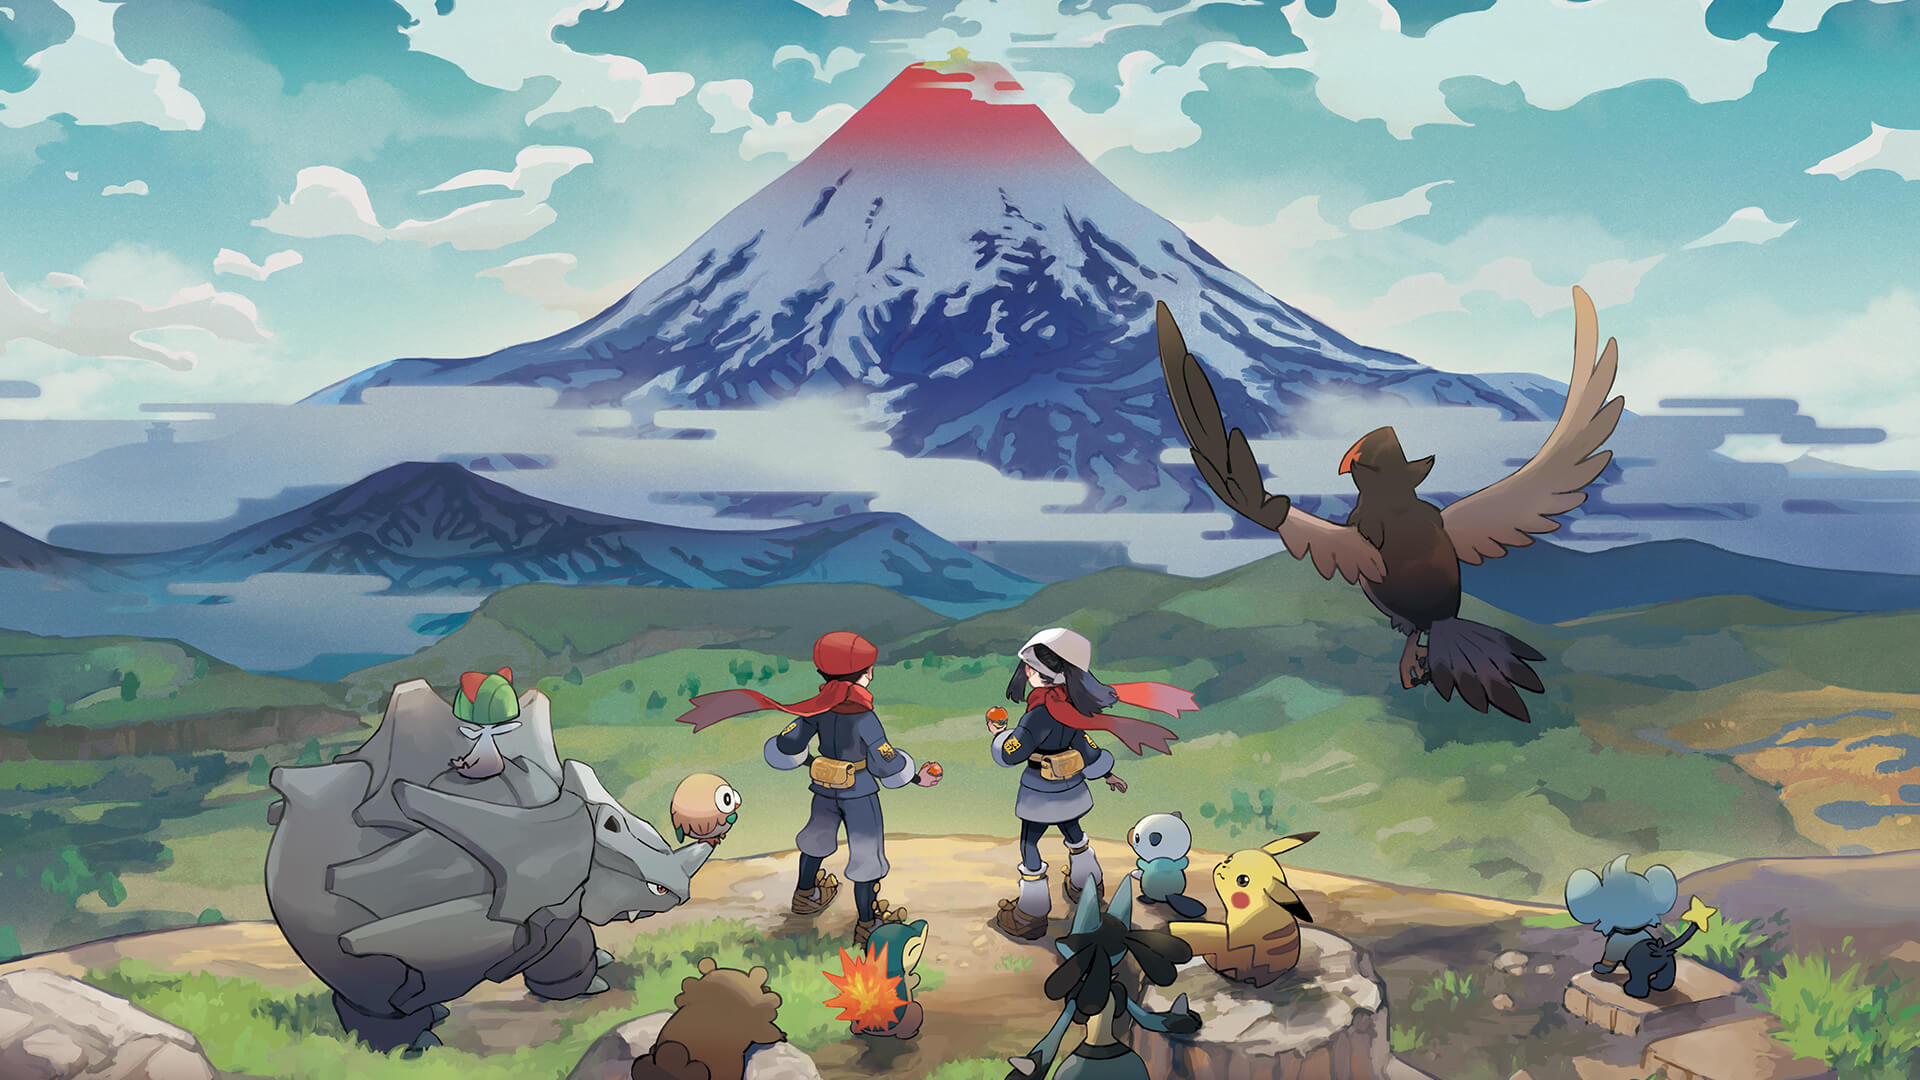 Artwork of trainers and Pokemon overlooking the Hisui region from Pokémon Legends: Arceus